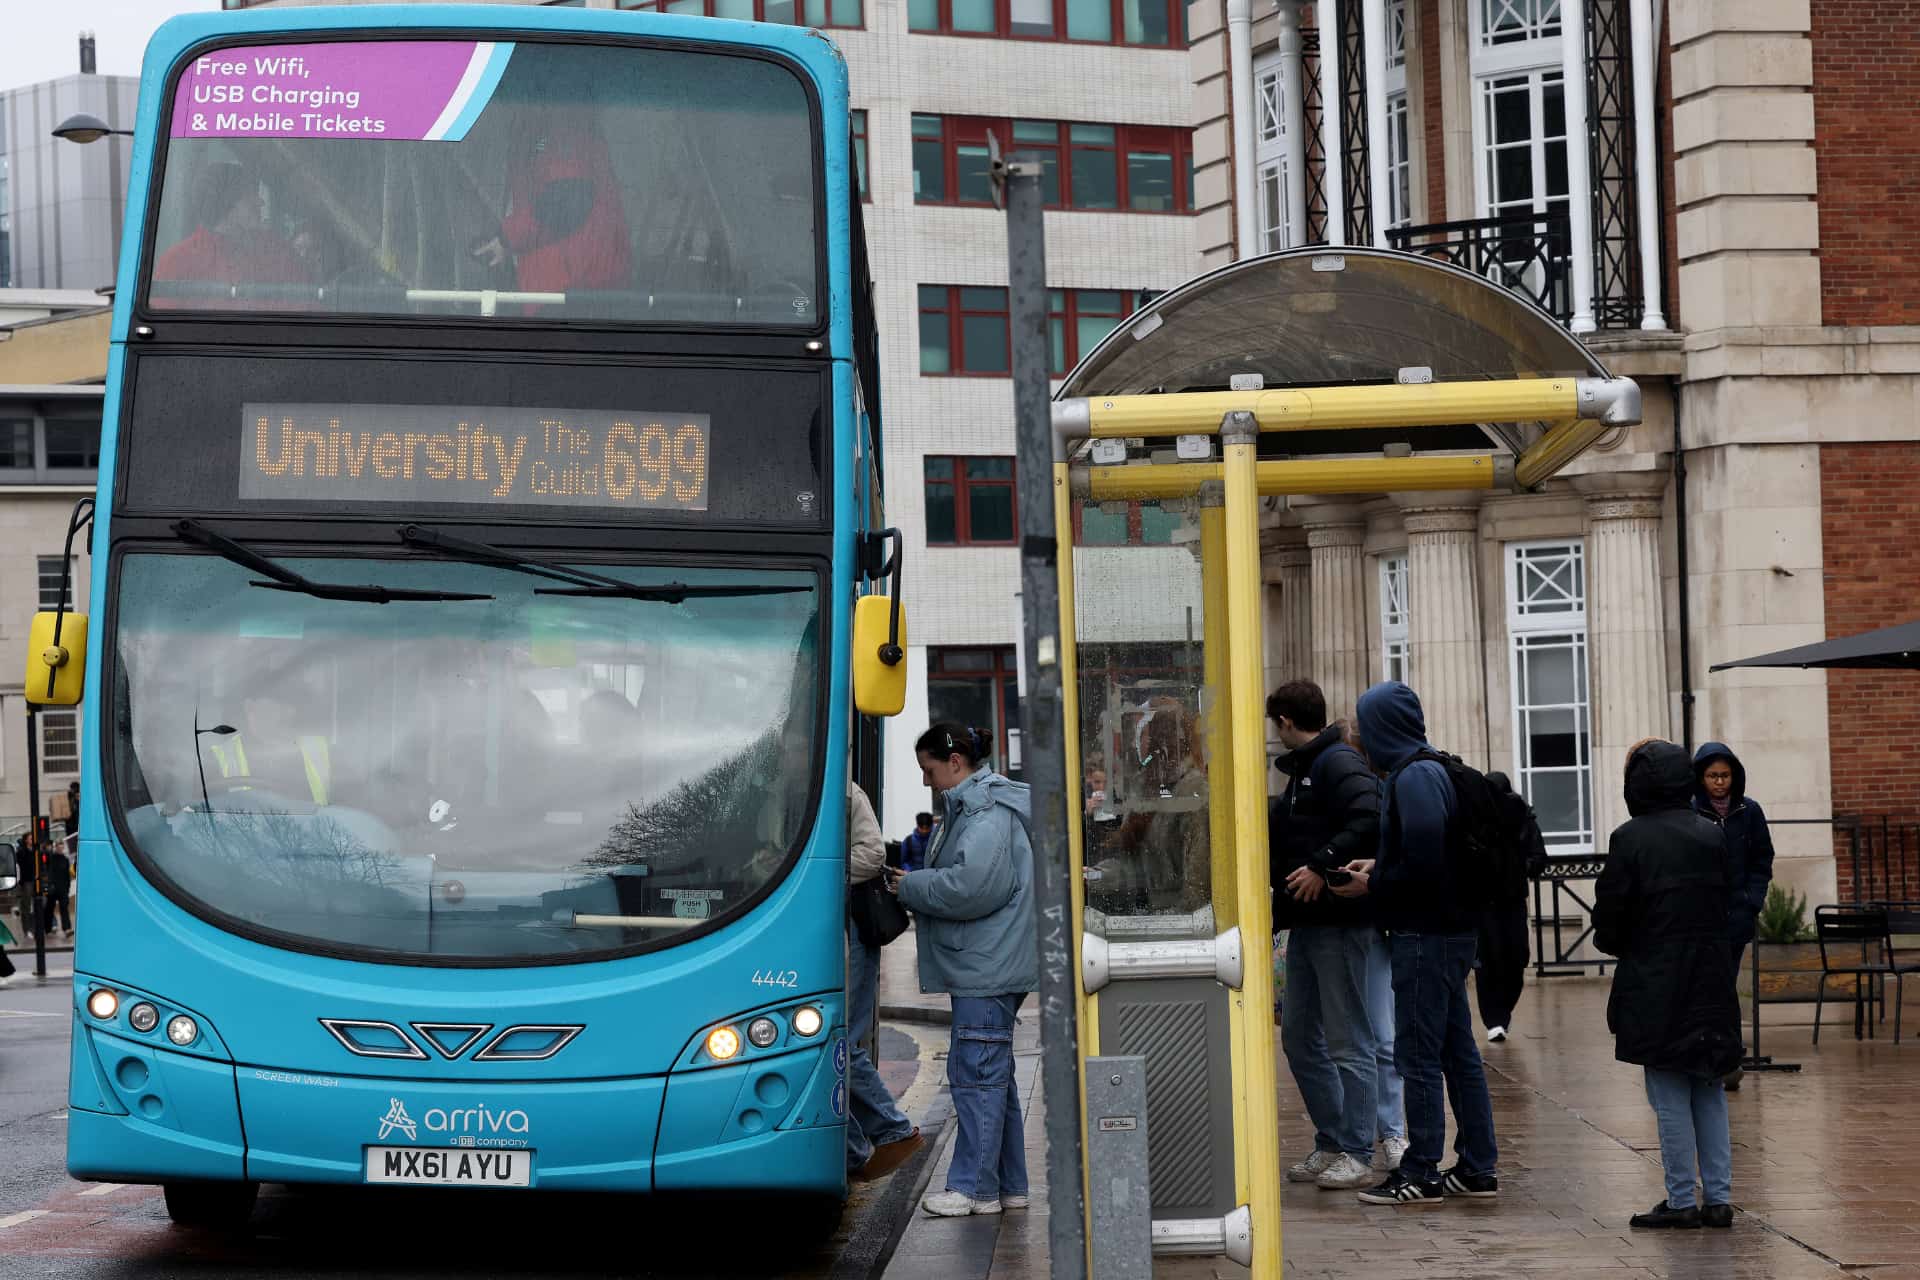 The 699 bus on the University Campus stopped with people getting on.